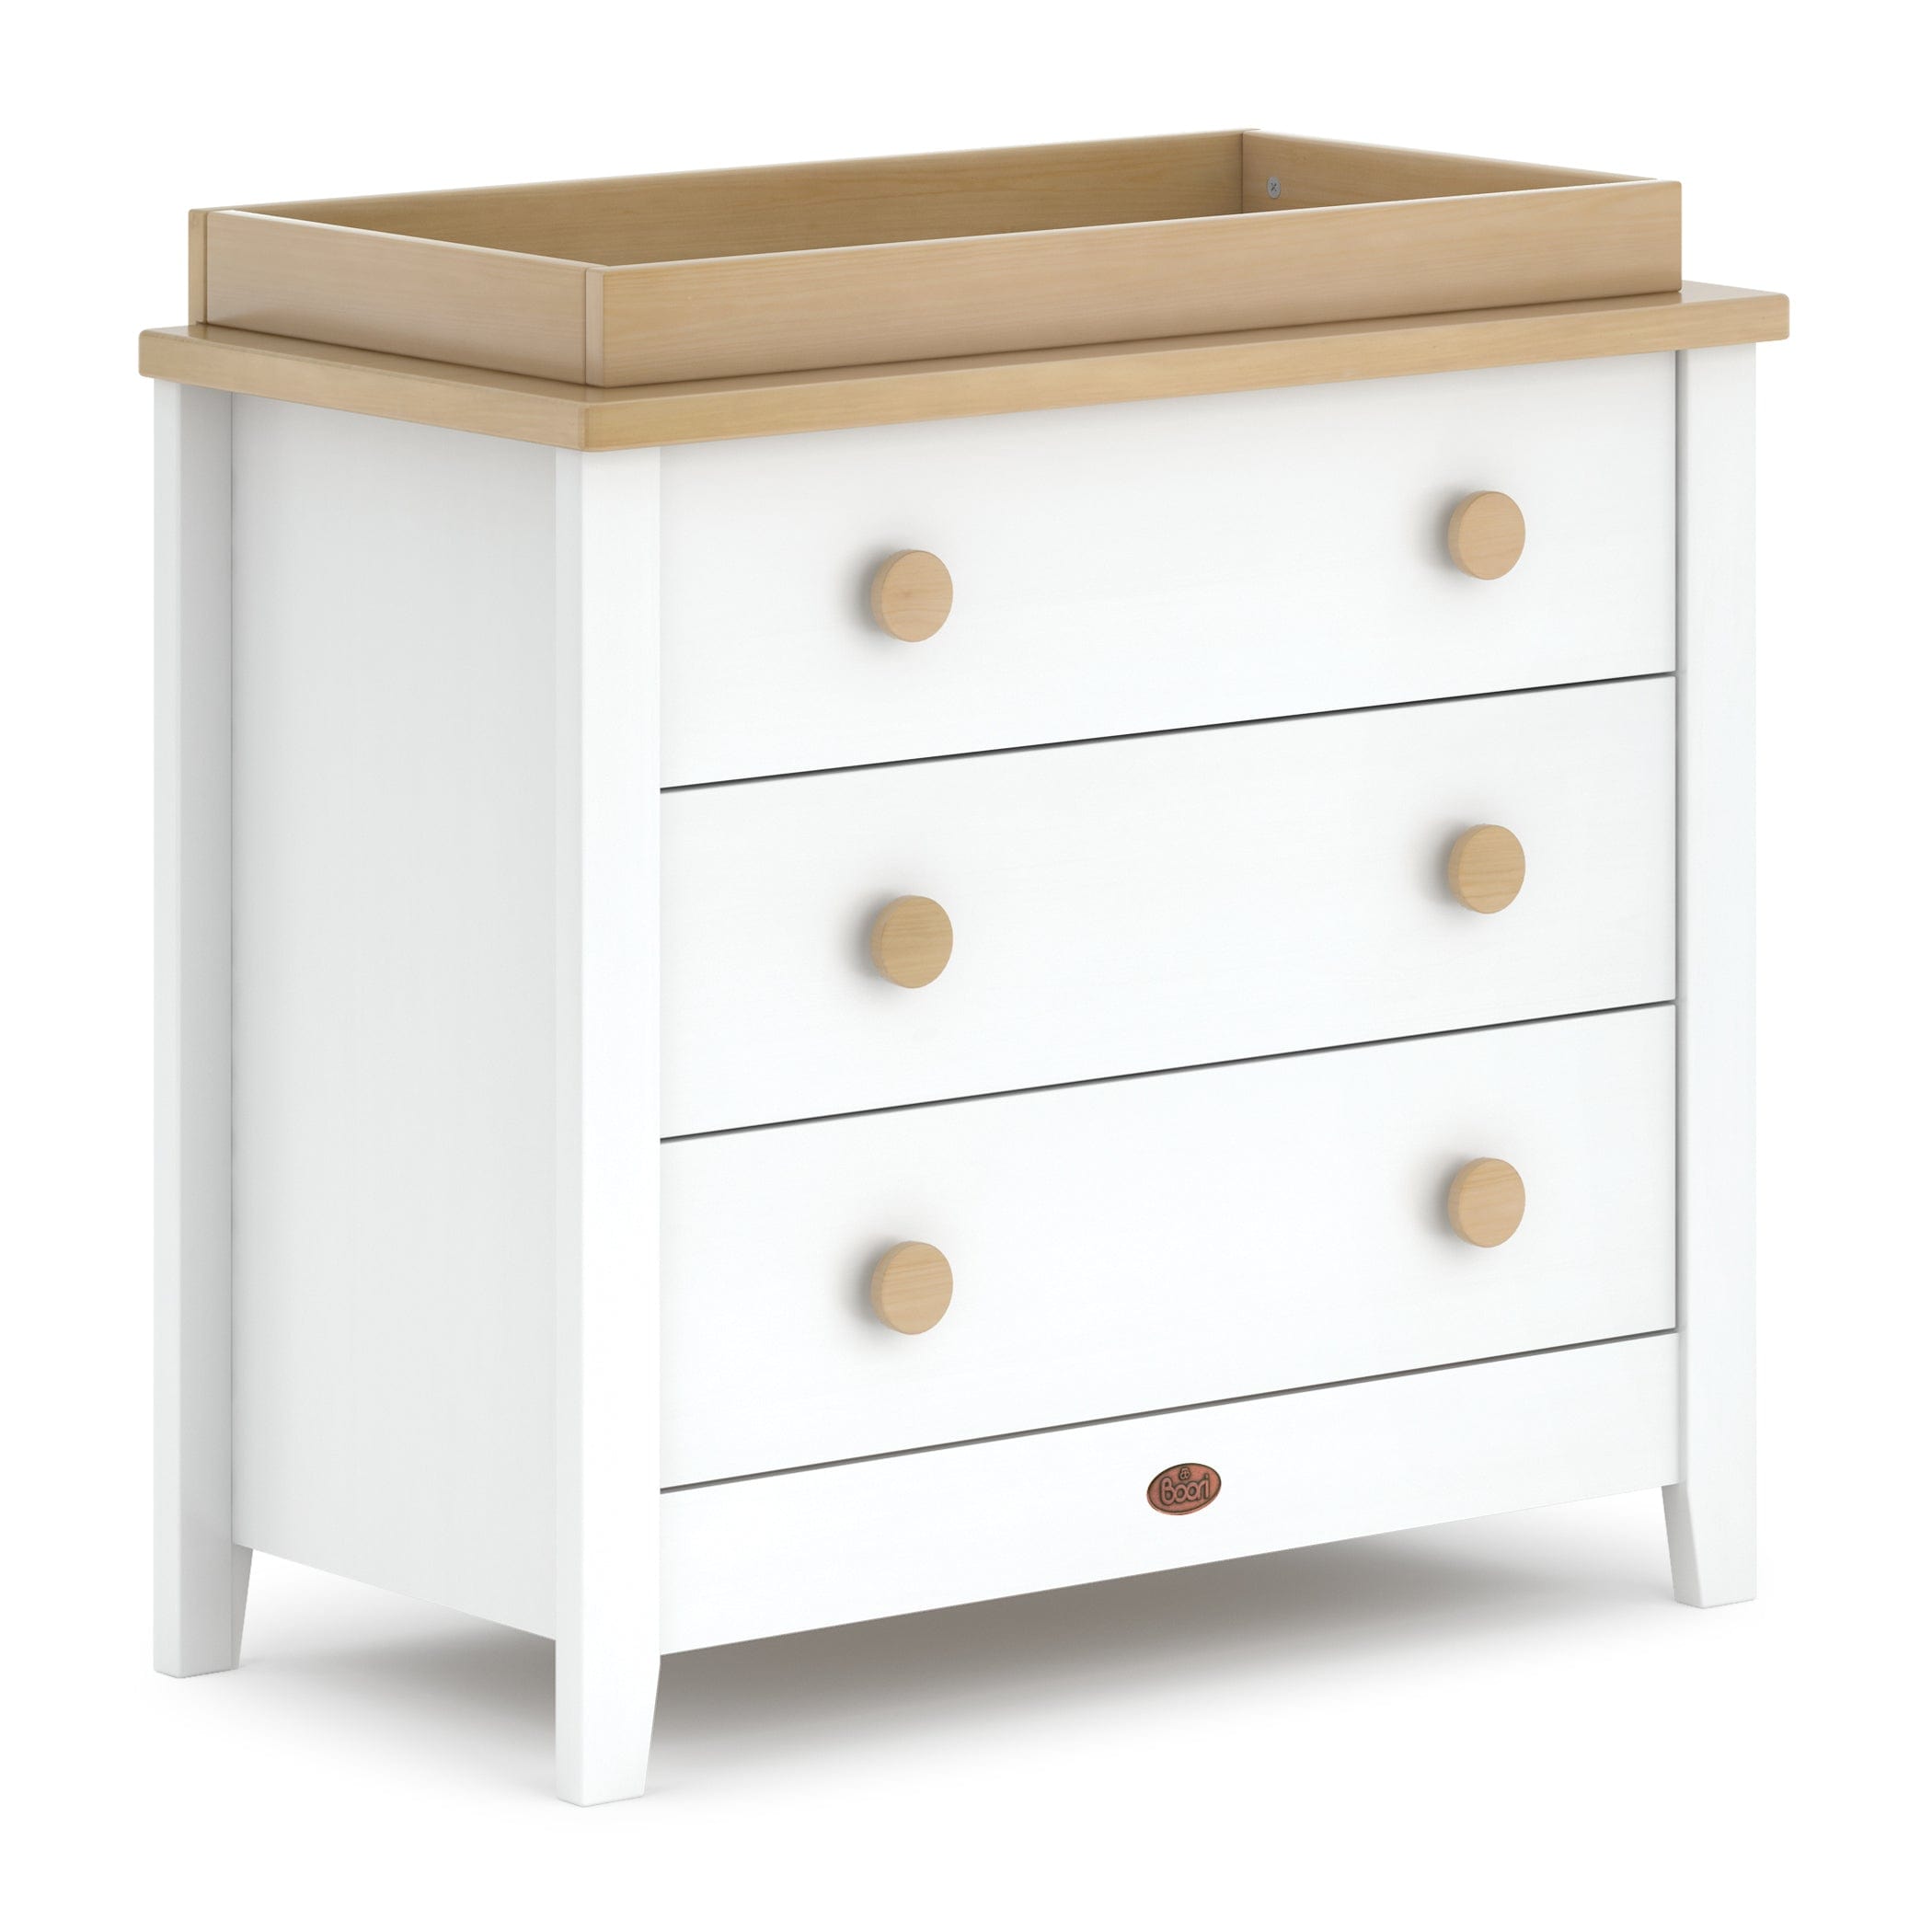 Boori 3 Drawer Chest Barley White & Almond Including Smart Assembly Chest Changing Tray Dressers & Changers B-3DCCHTV23-BAAD 9328730105750